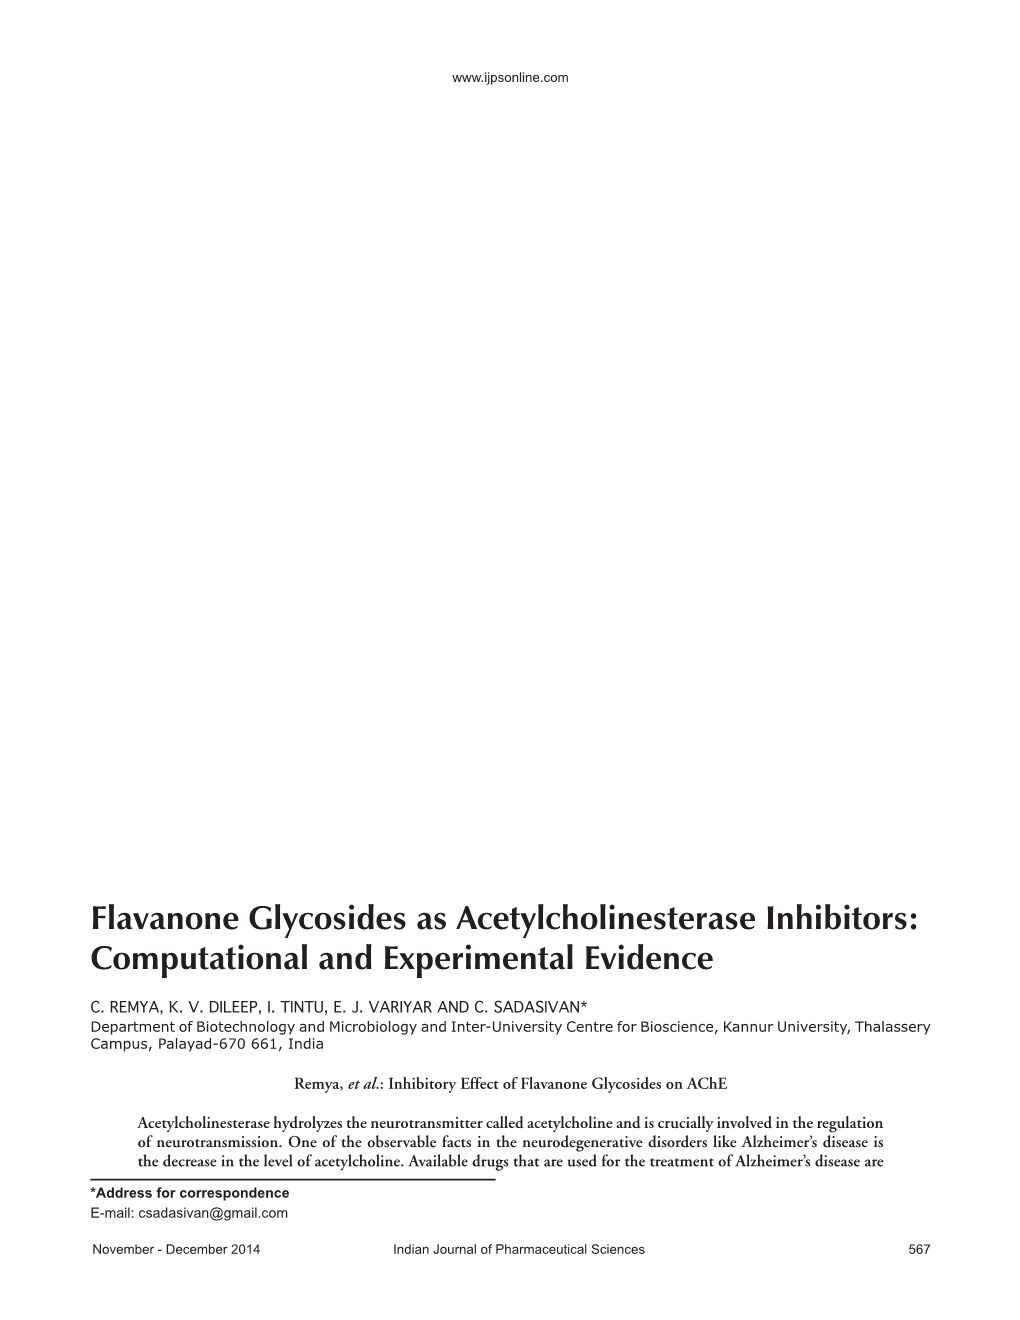 Flavanone Glycosides As Acetylcholinesterase Inhibitors: Computational and Experimental Evidence